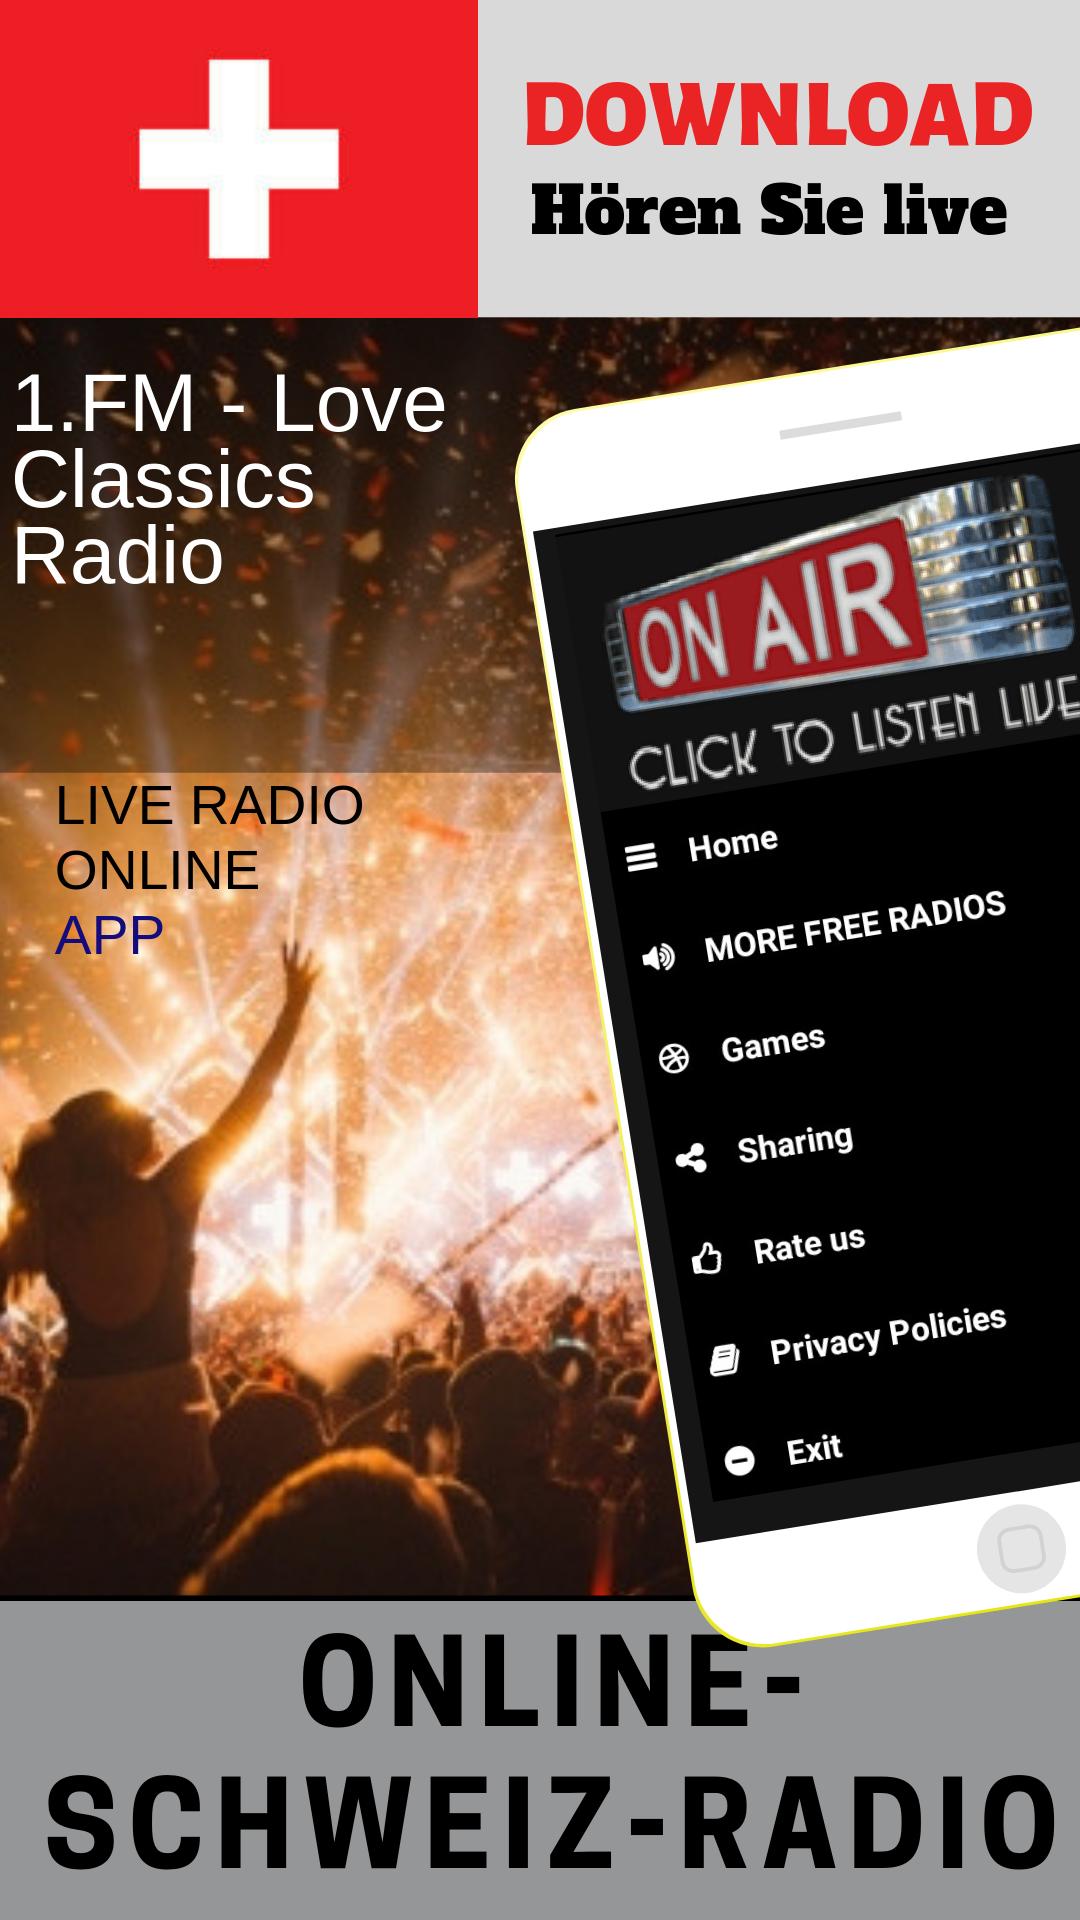 1.FM - Love Classics Radio Free Online for Android - APK Download